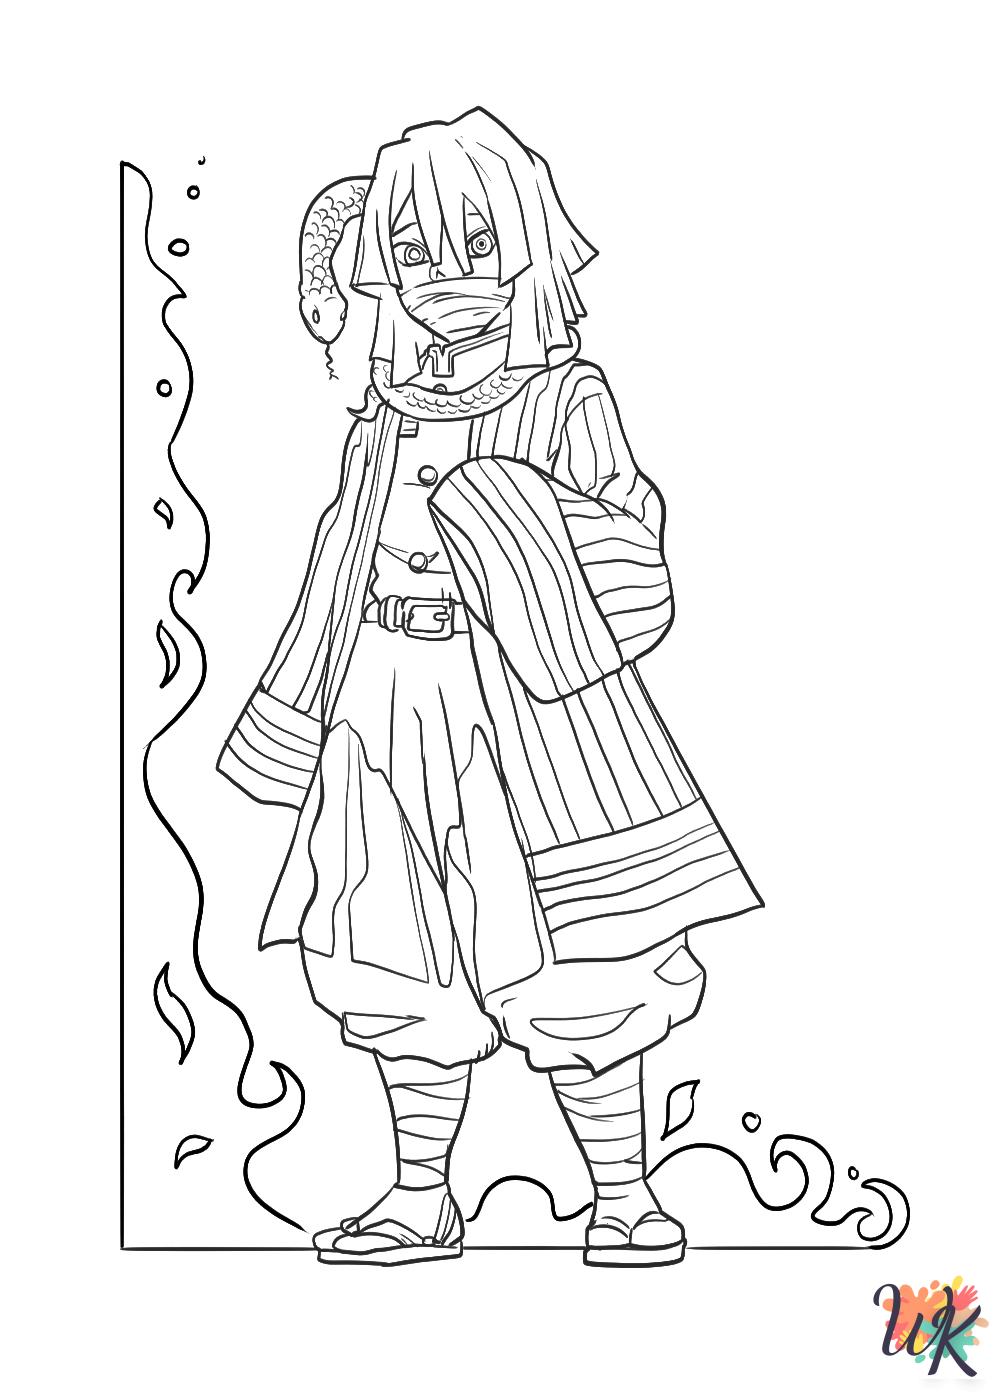 Demon Slayer Coloring Pages 17